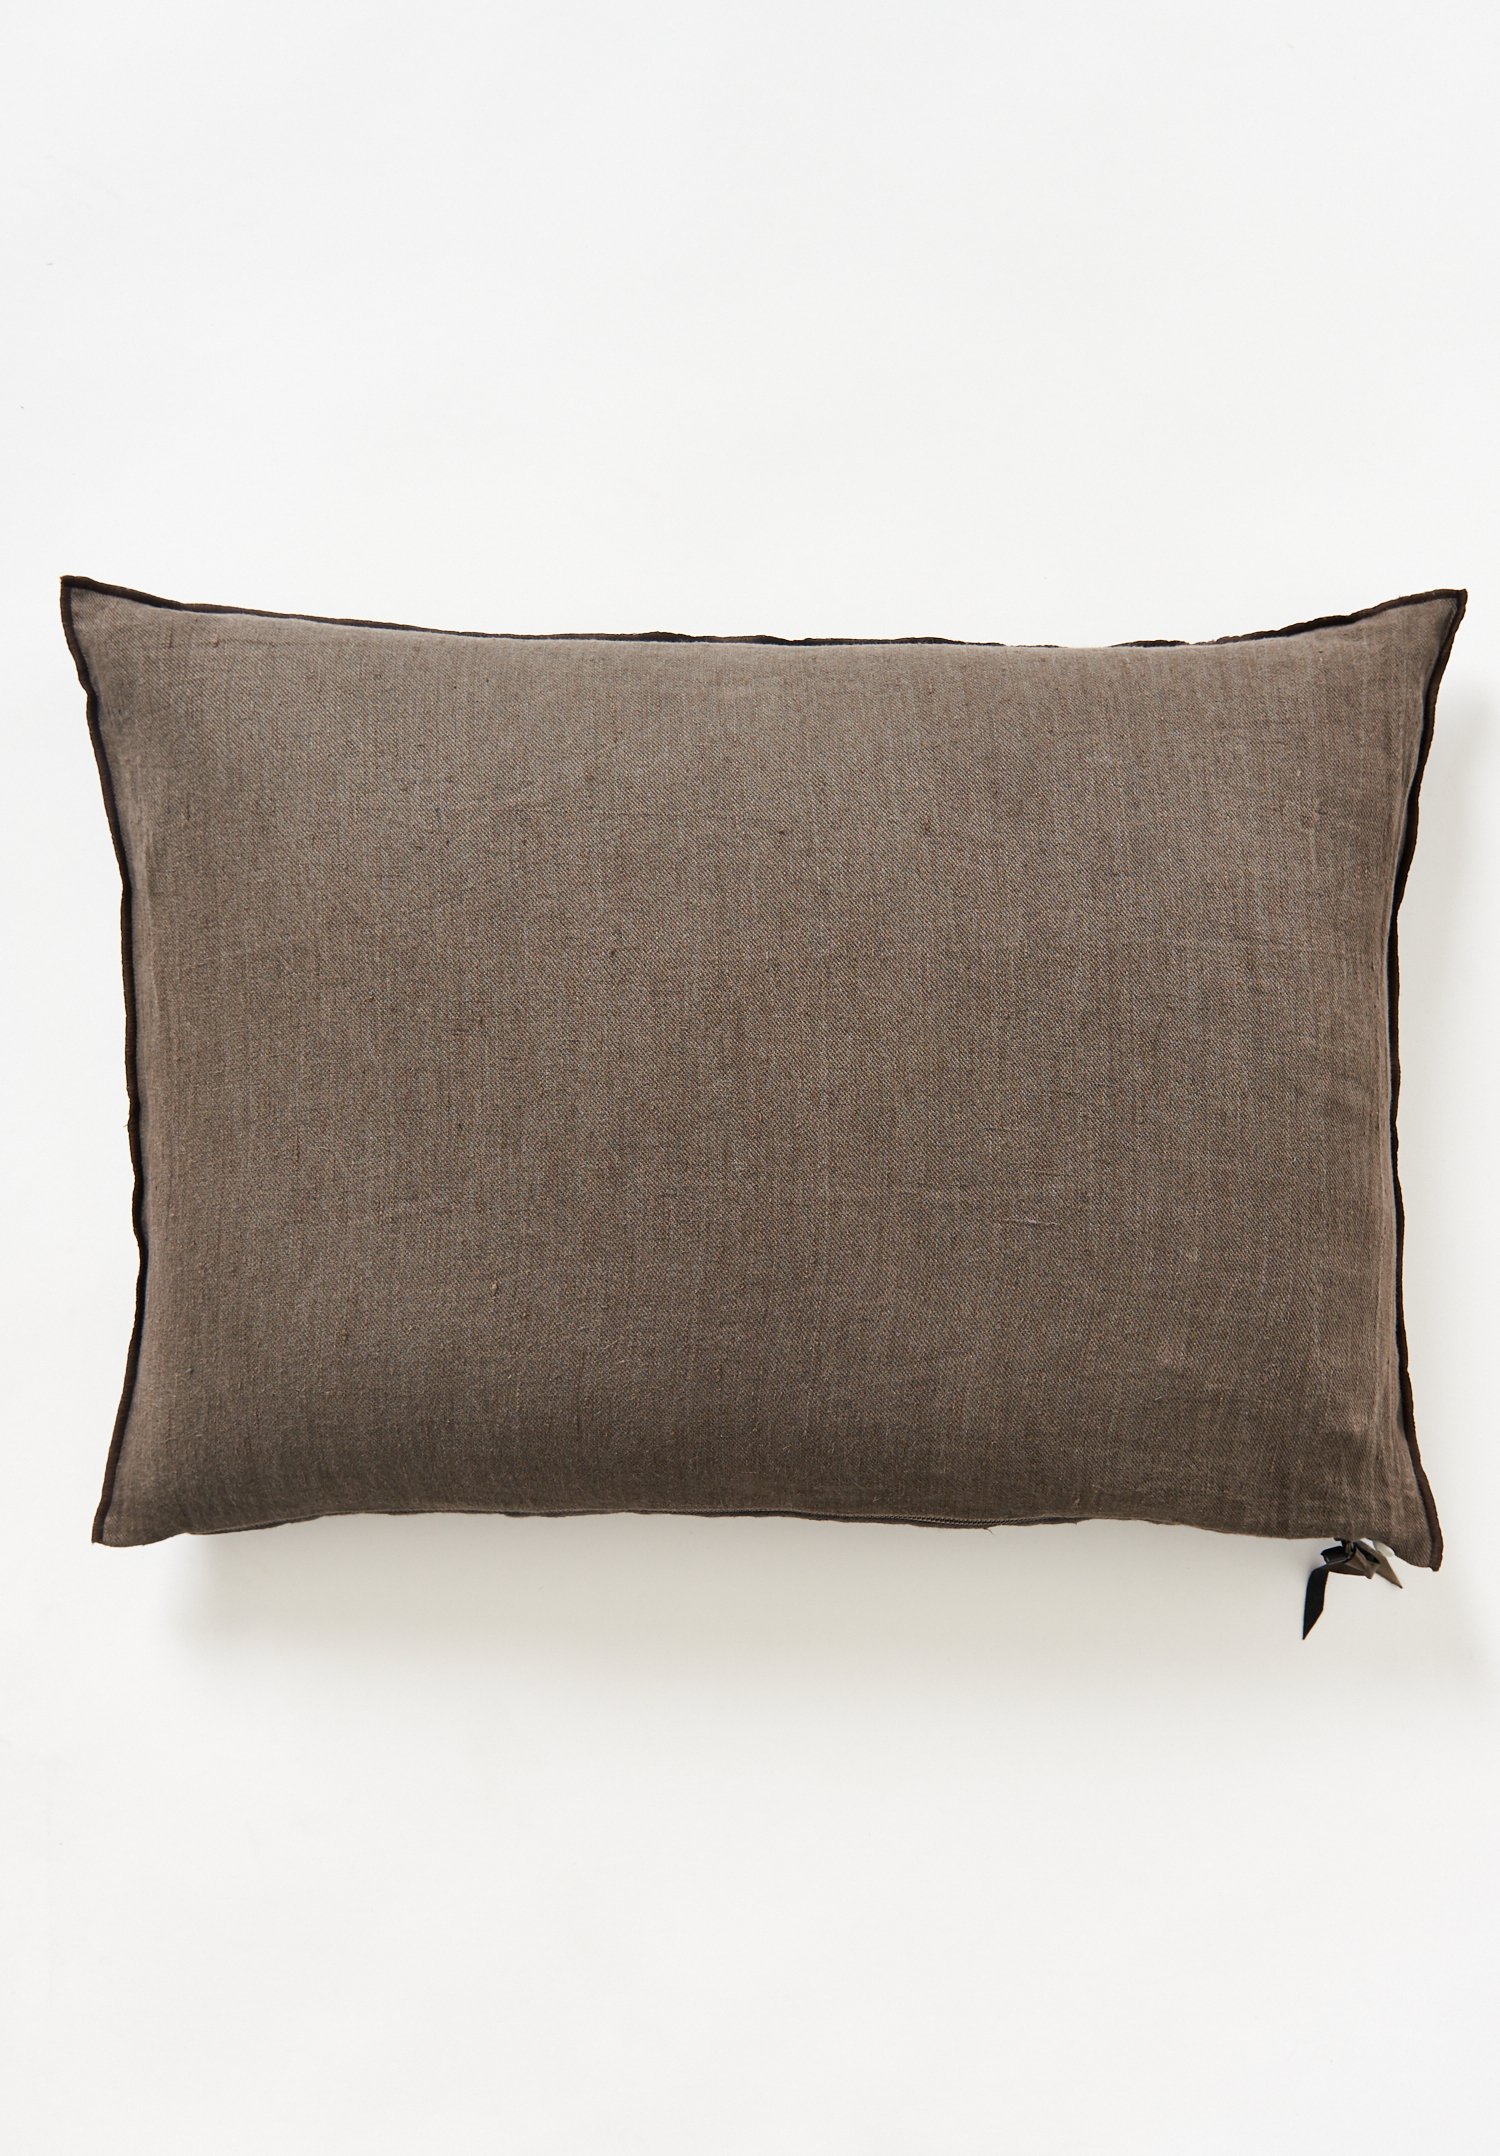 Maison de Vacances Crumpled Washed Linen Pillow in Taupe 